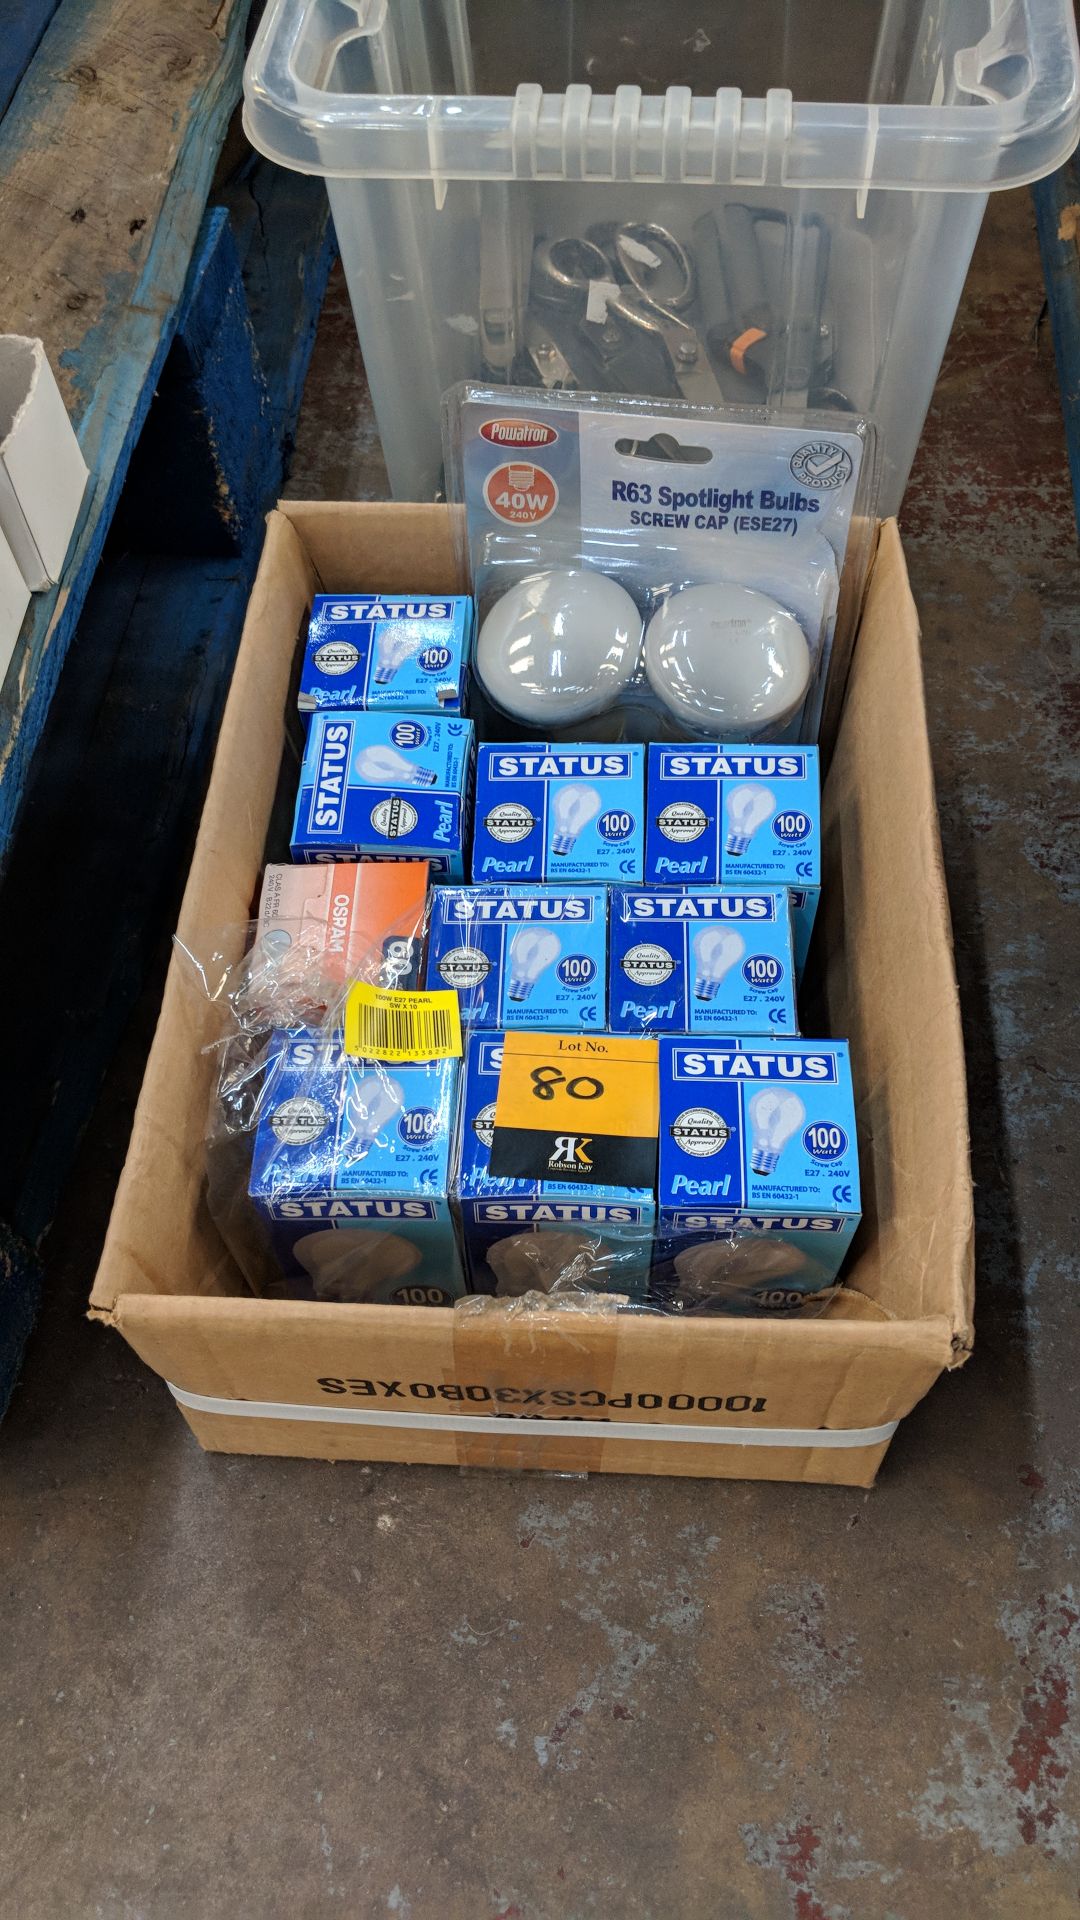 Box of light bulbs IMPORTANT: Please remember goods successfully bid upon must be paid for and